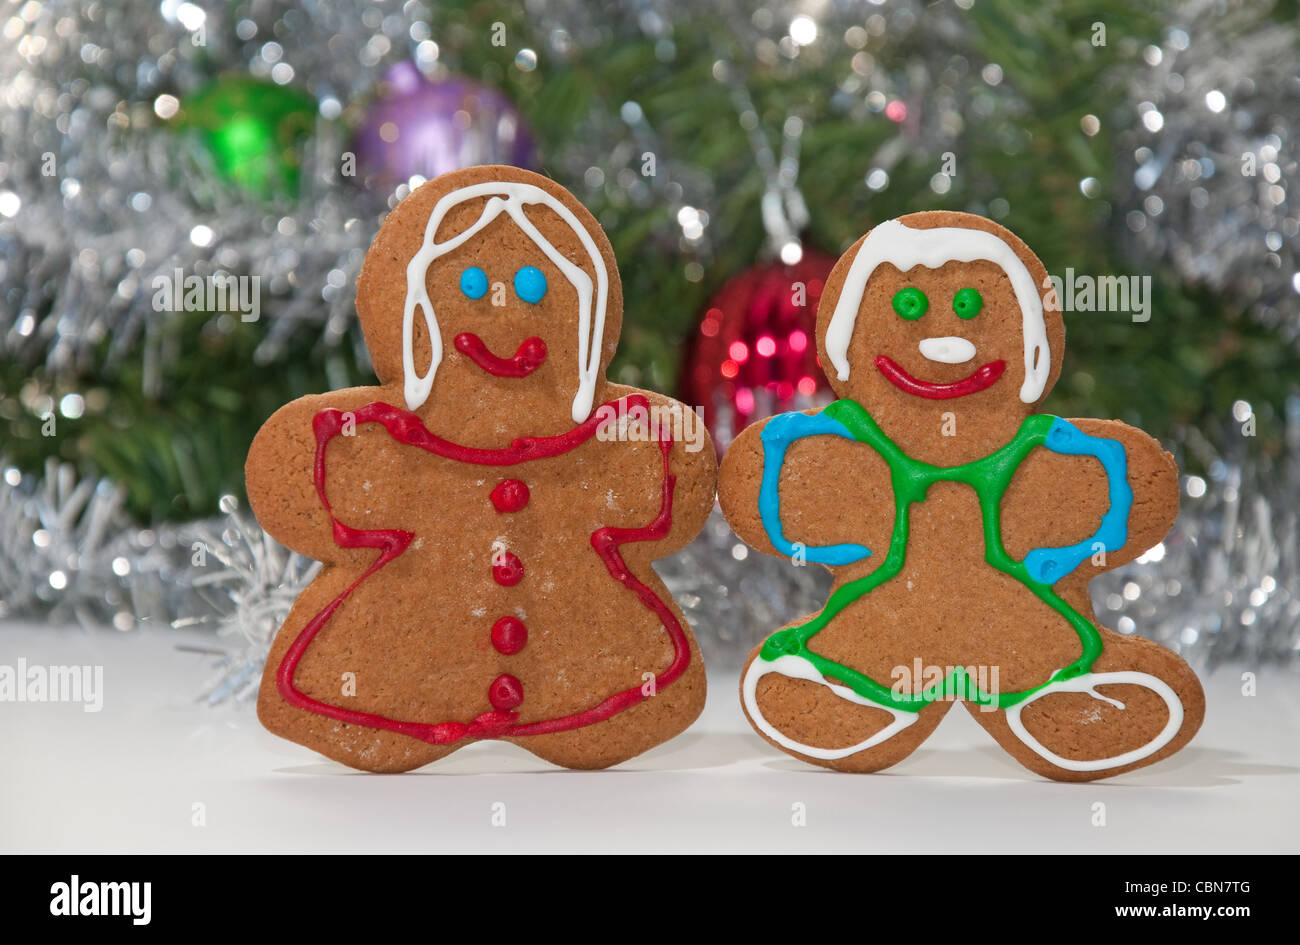 Gingerbread man and woman holding hands Stock Photo